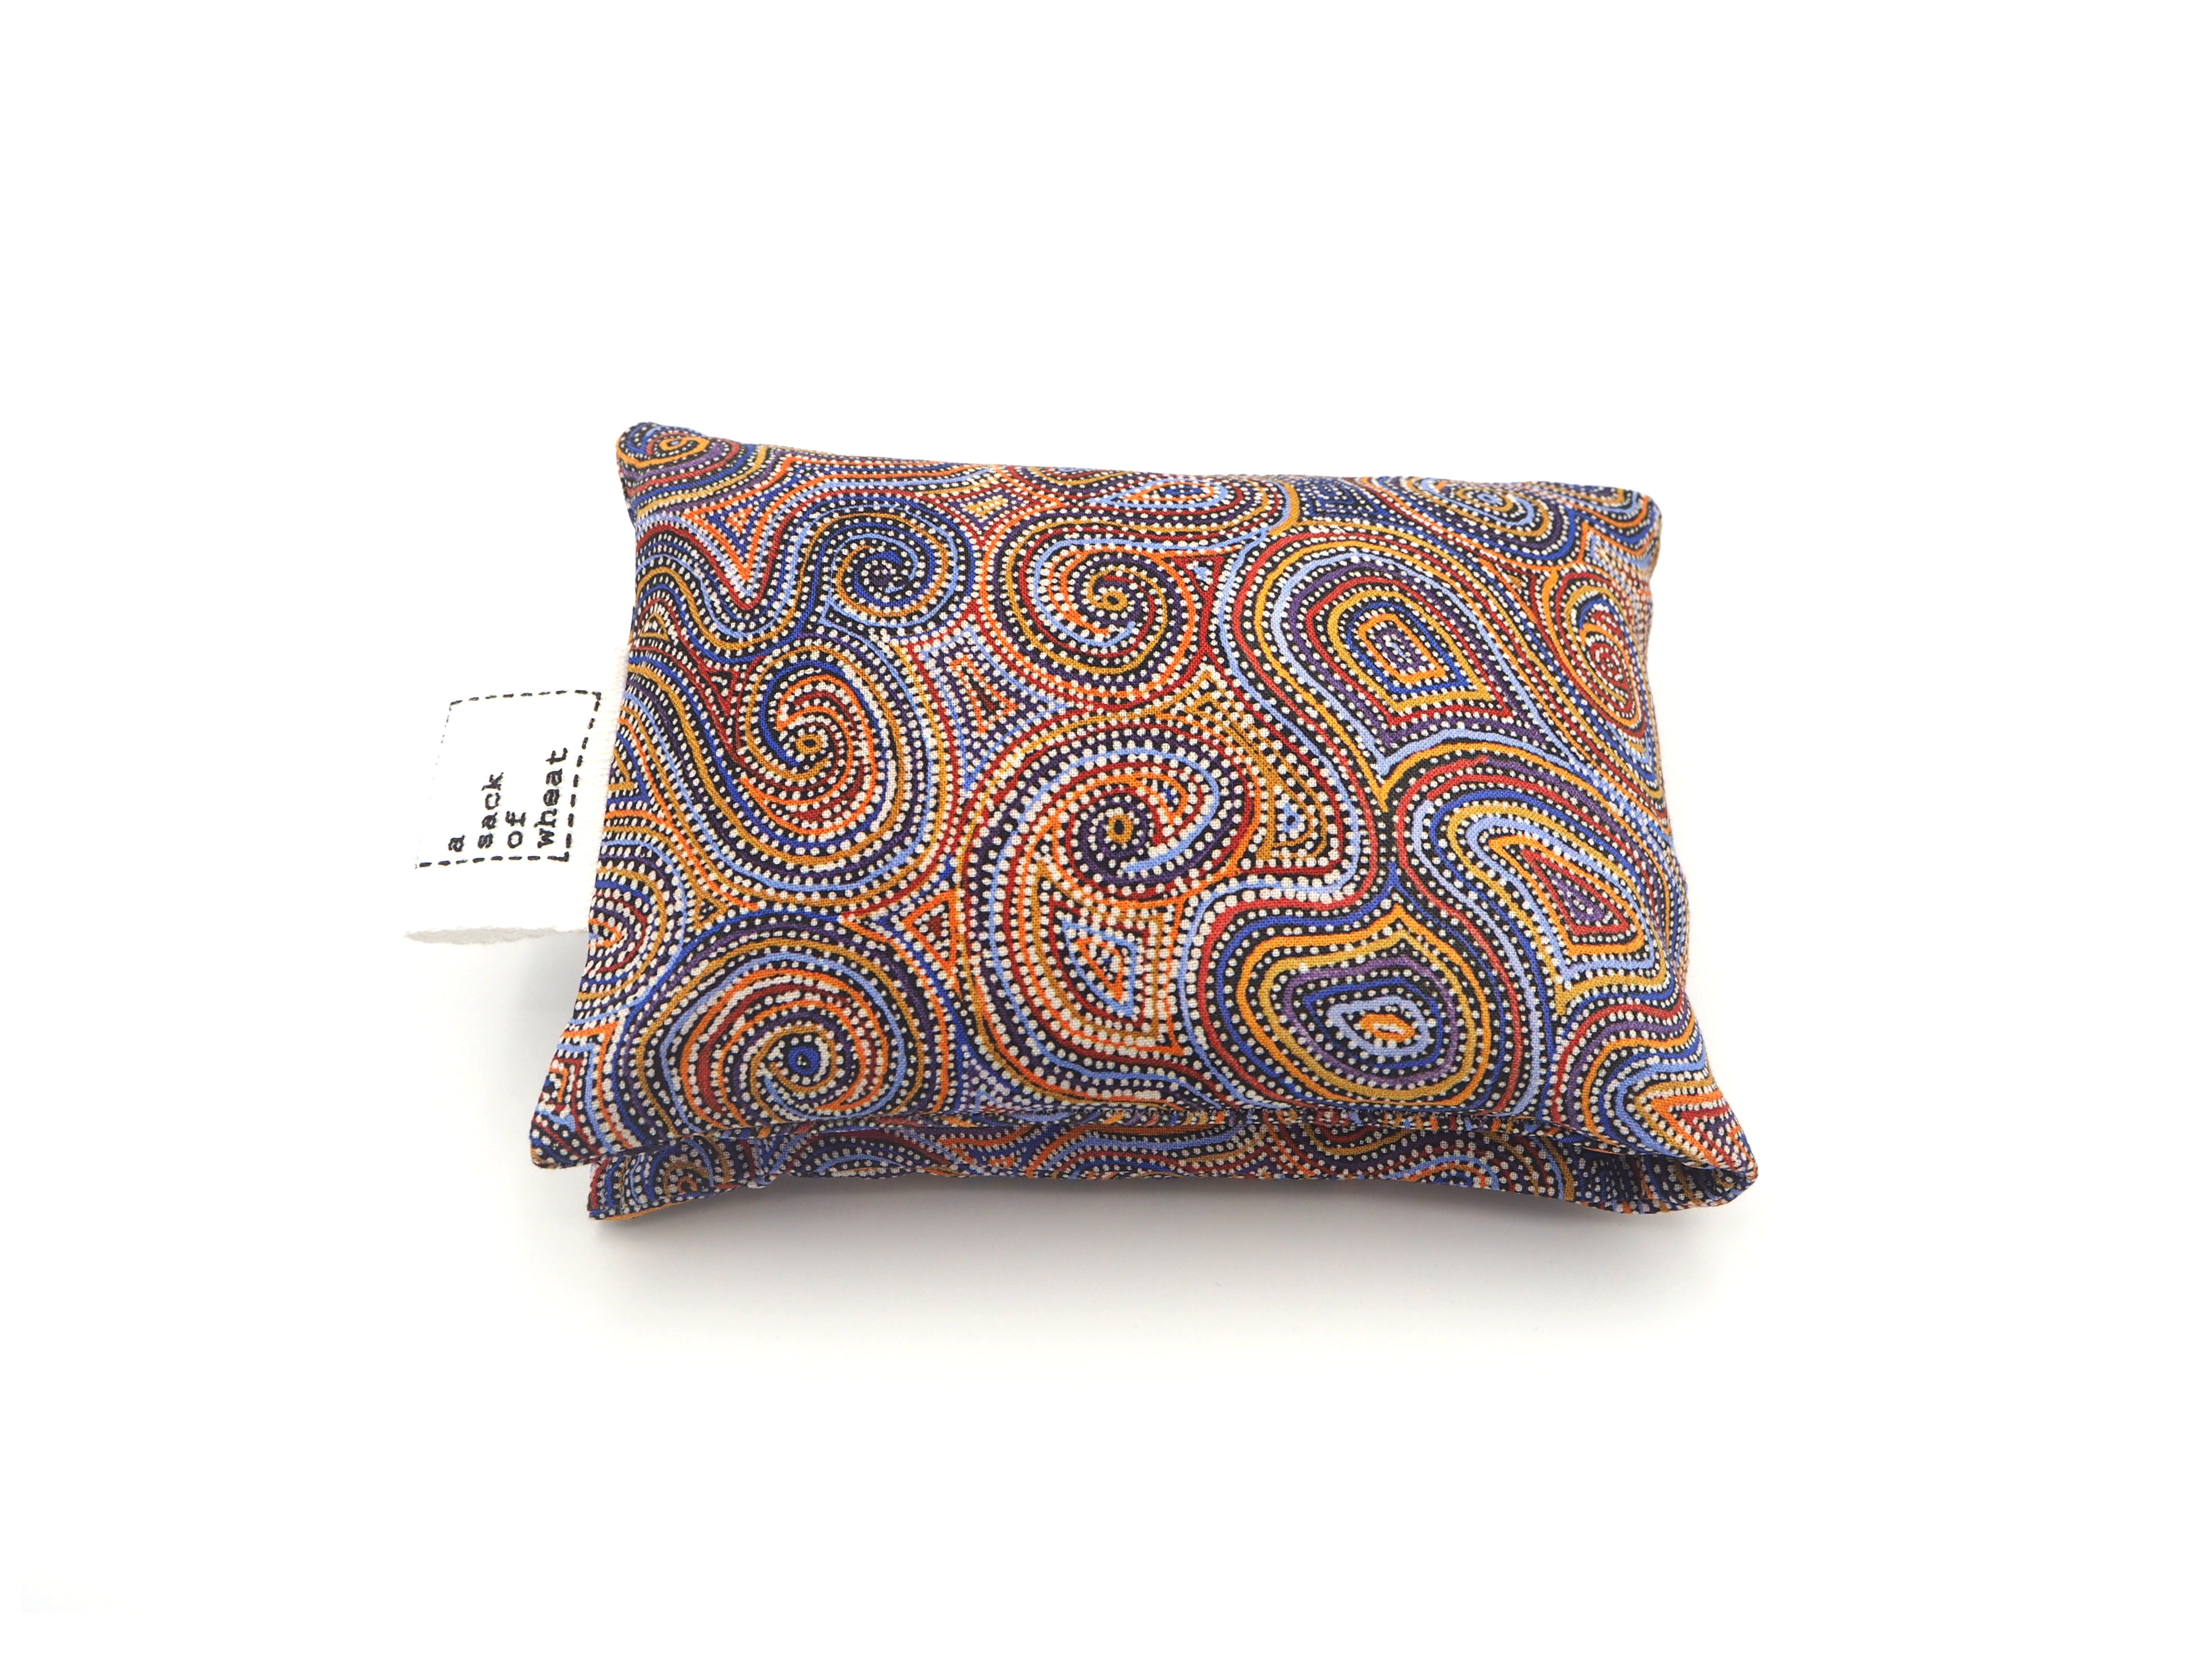 Folded view of A Sack Of Wheat, featuring Mina Mina Dreaming Dot Painting print, 100% cotton fabric